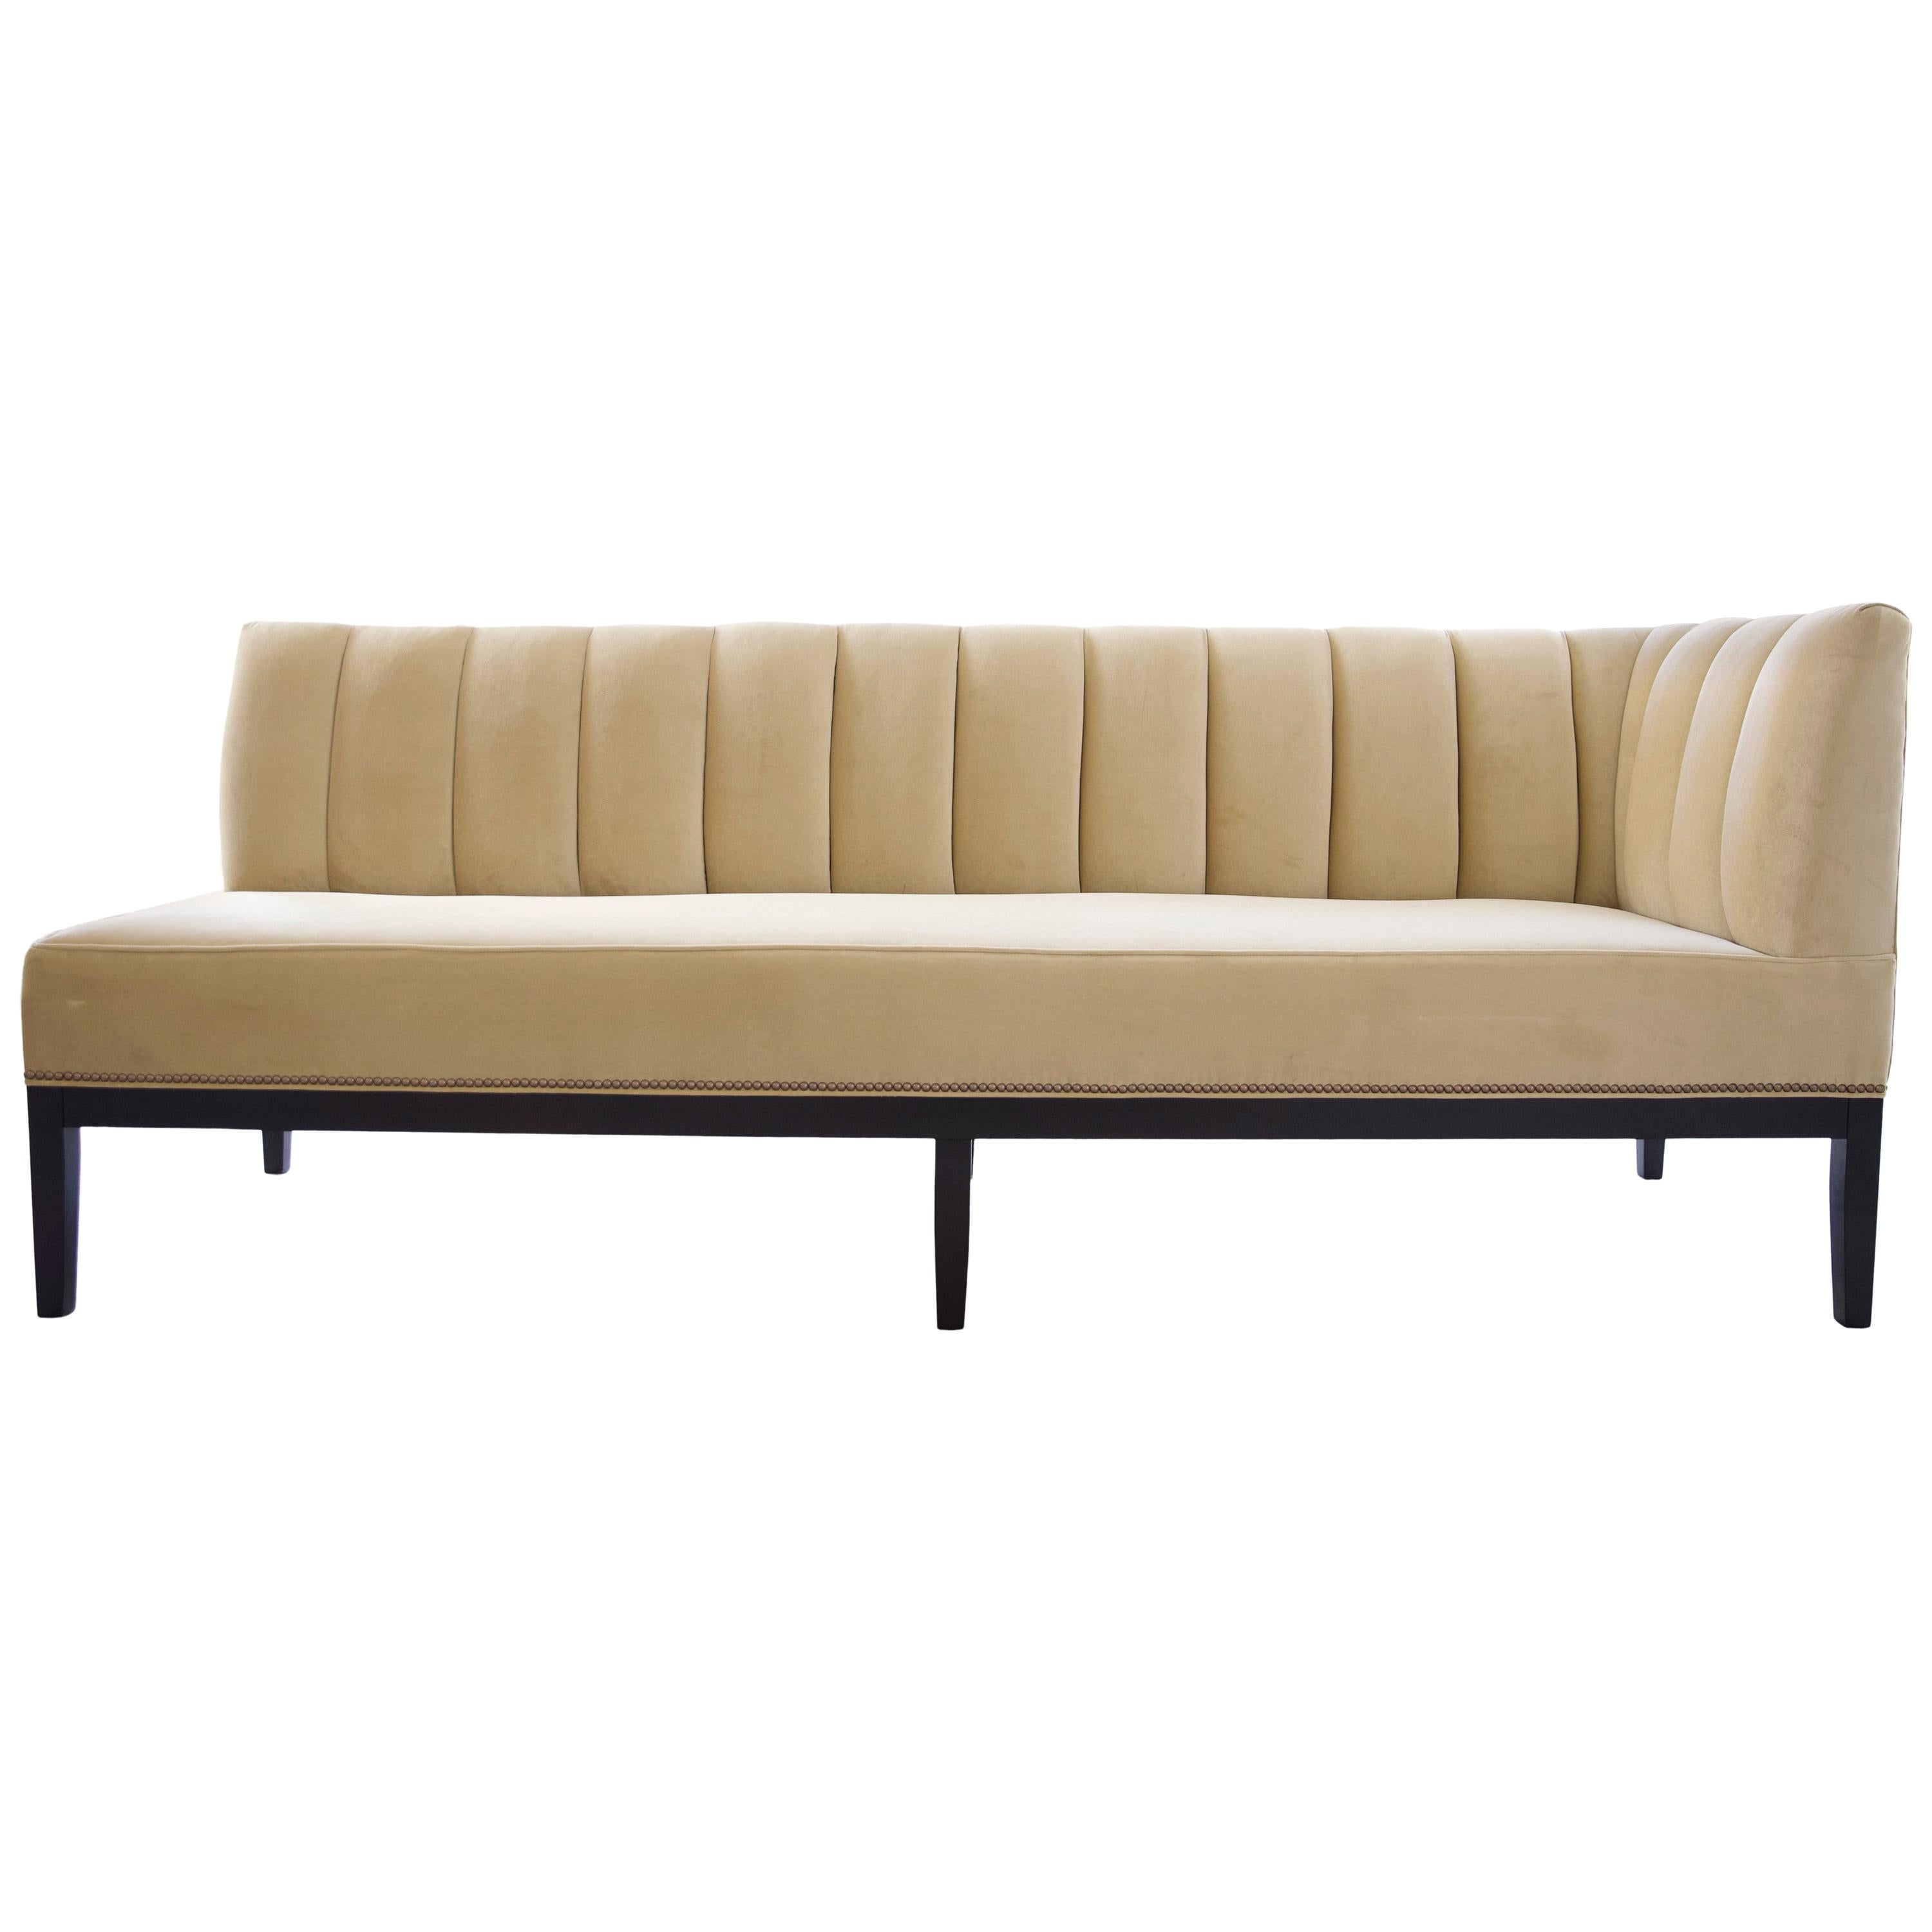 Channel Banquette Lounge Seating Handcrafted For Sale